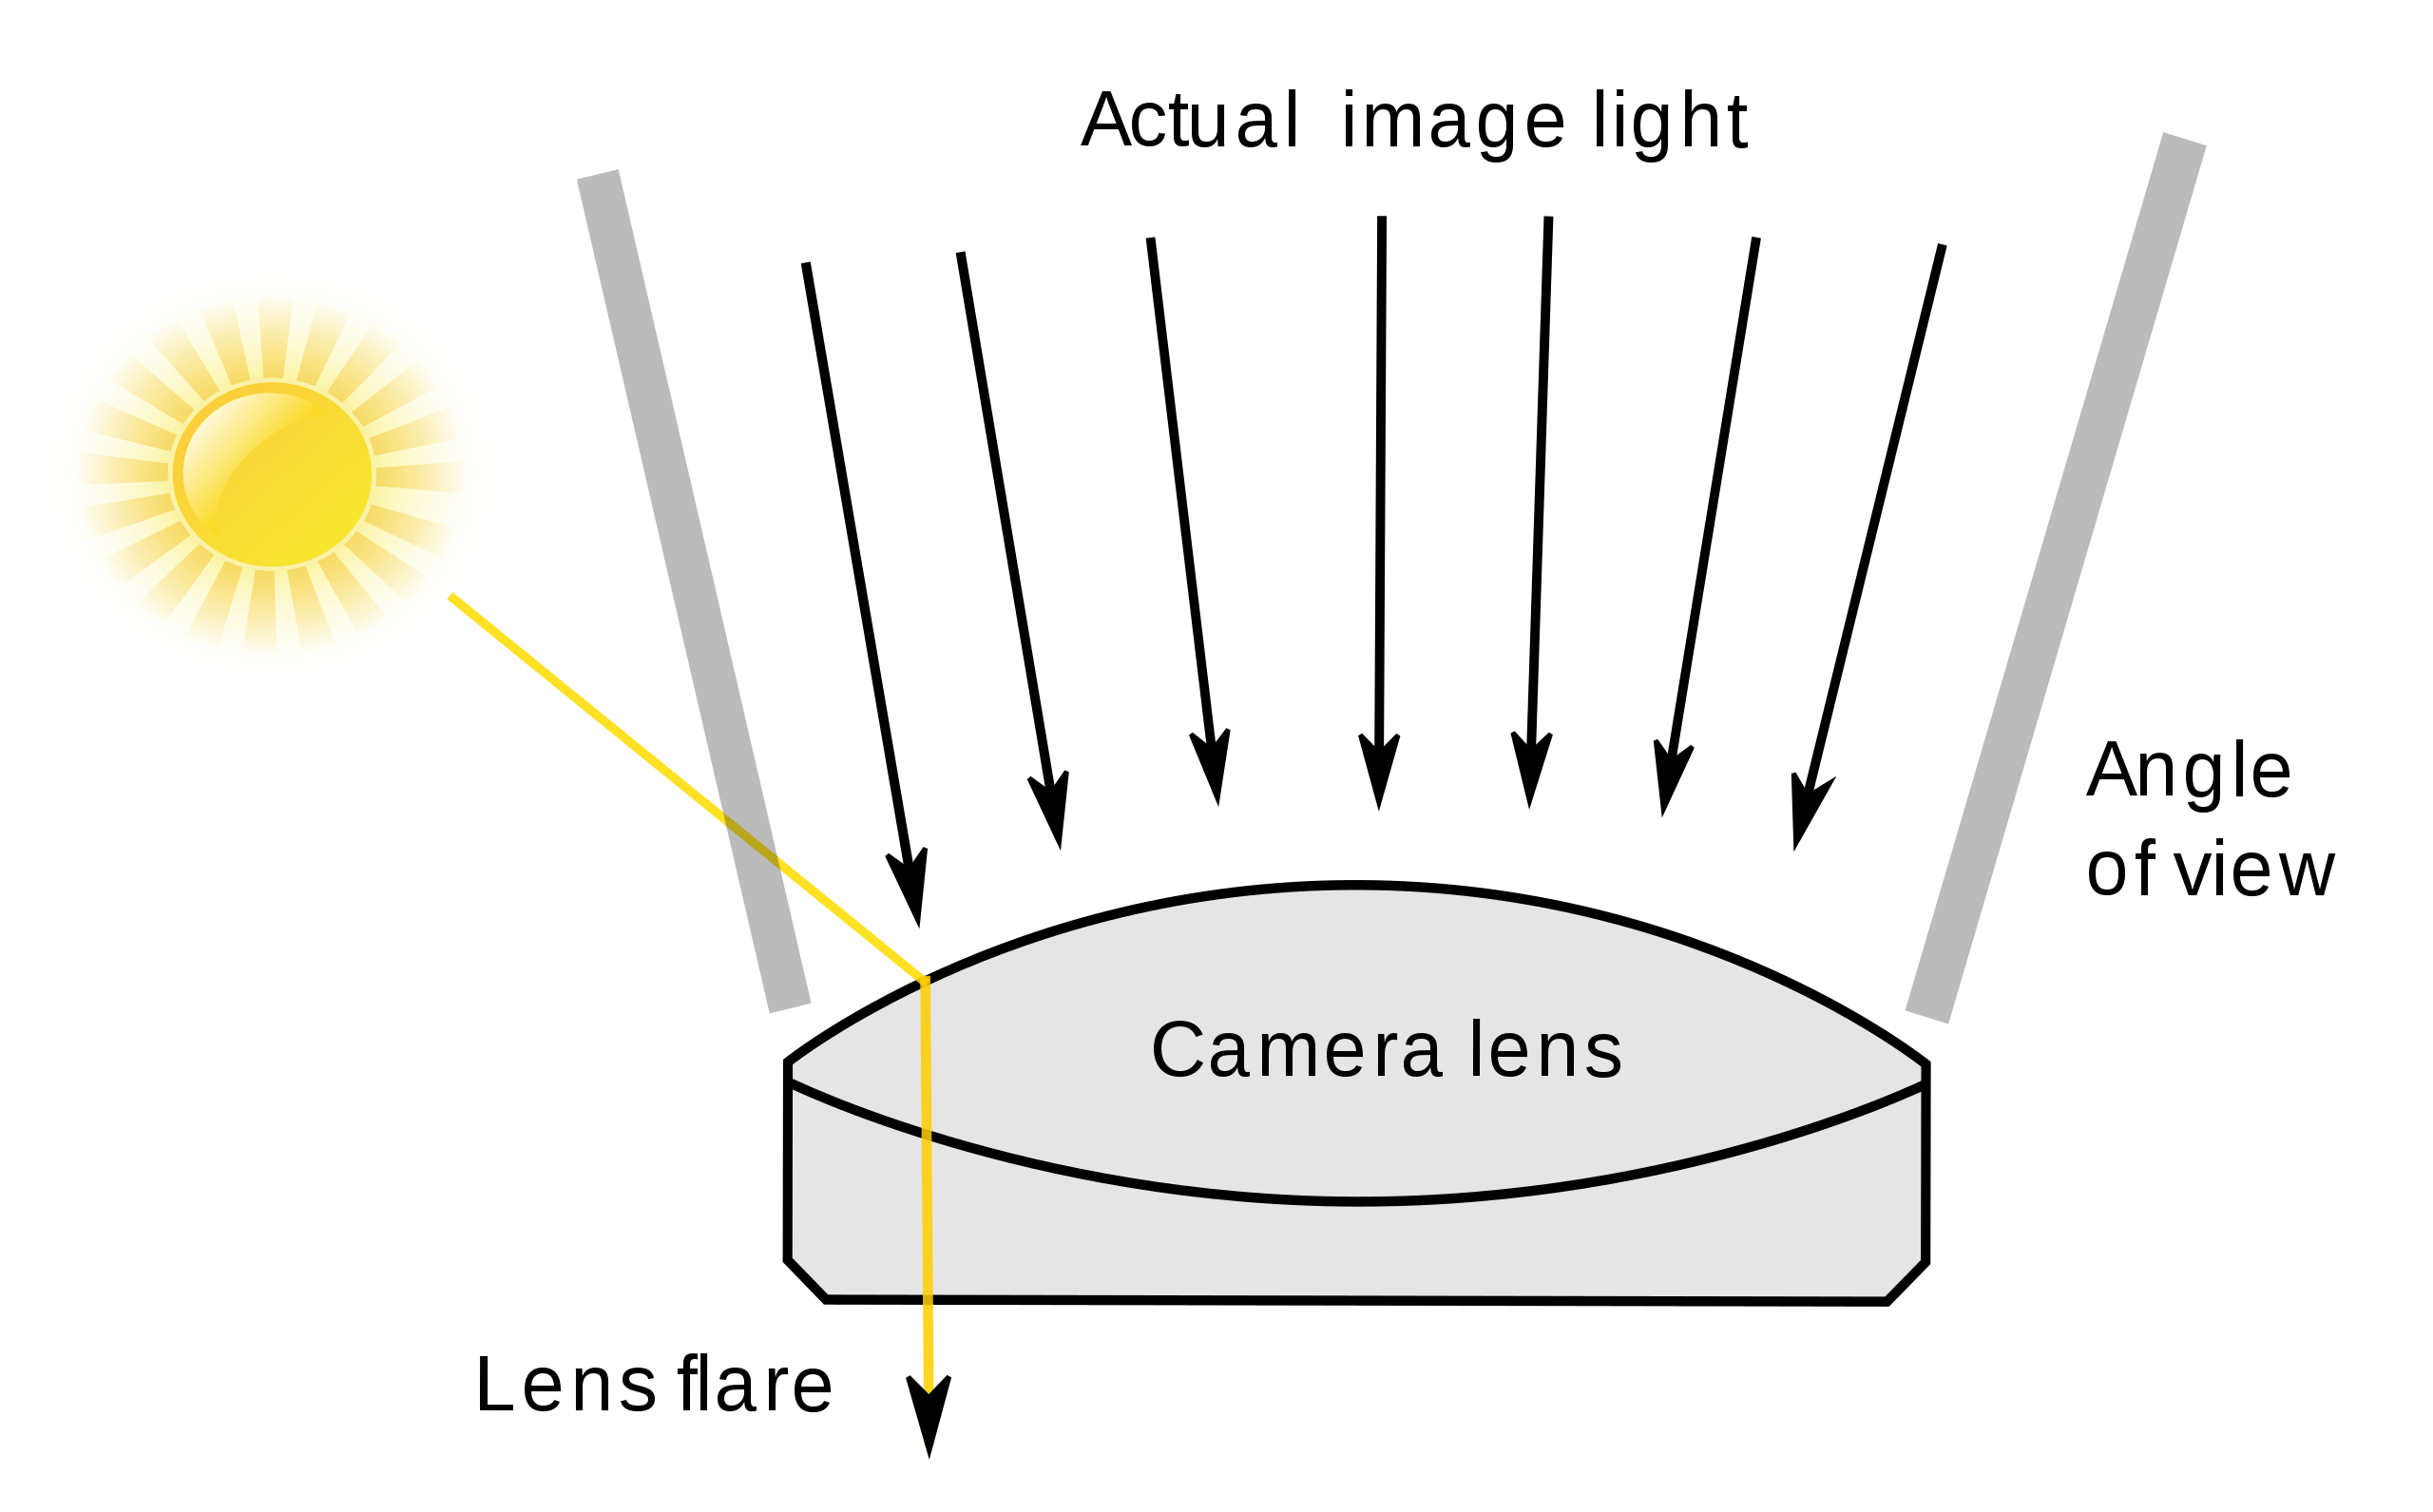 A diagram showing how light enters a camera lens at various angles to create a flare.